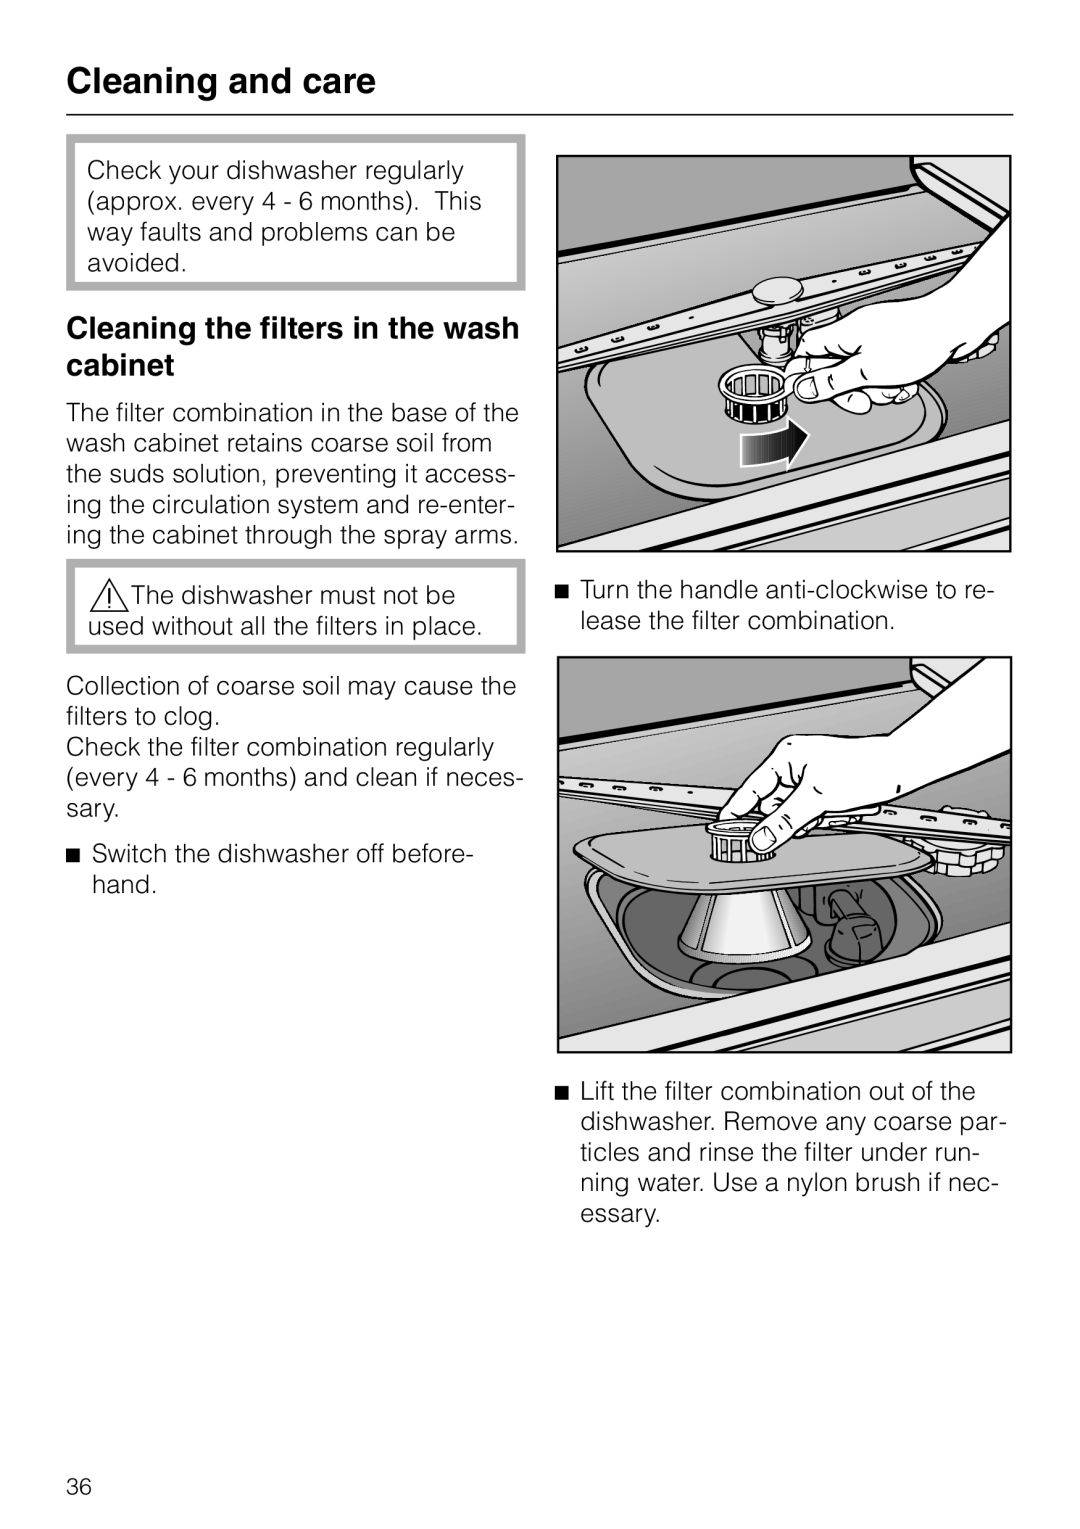 Miele dishwashers installation instructions Cleaning and care, Cleaning the filters in the wash cabinet 